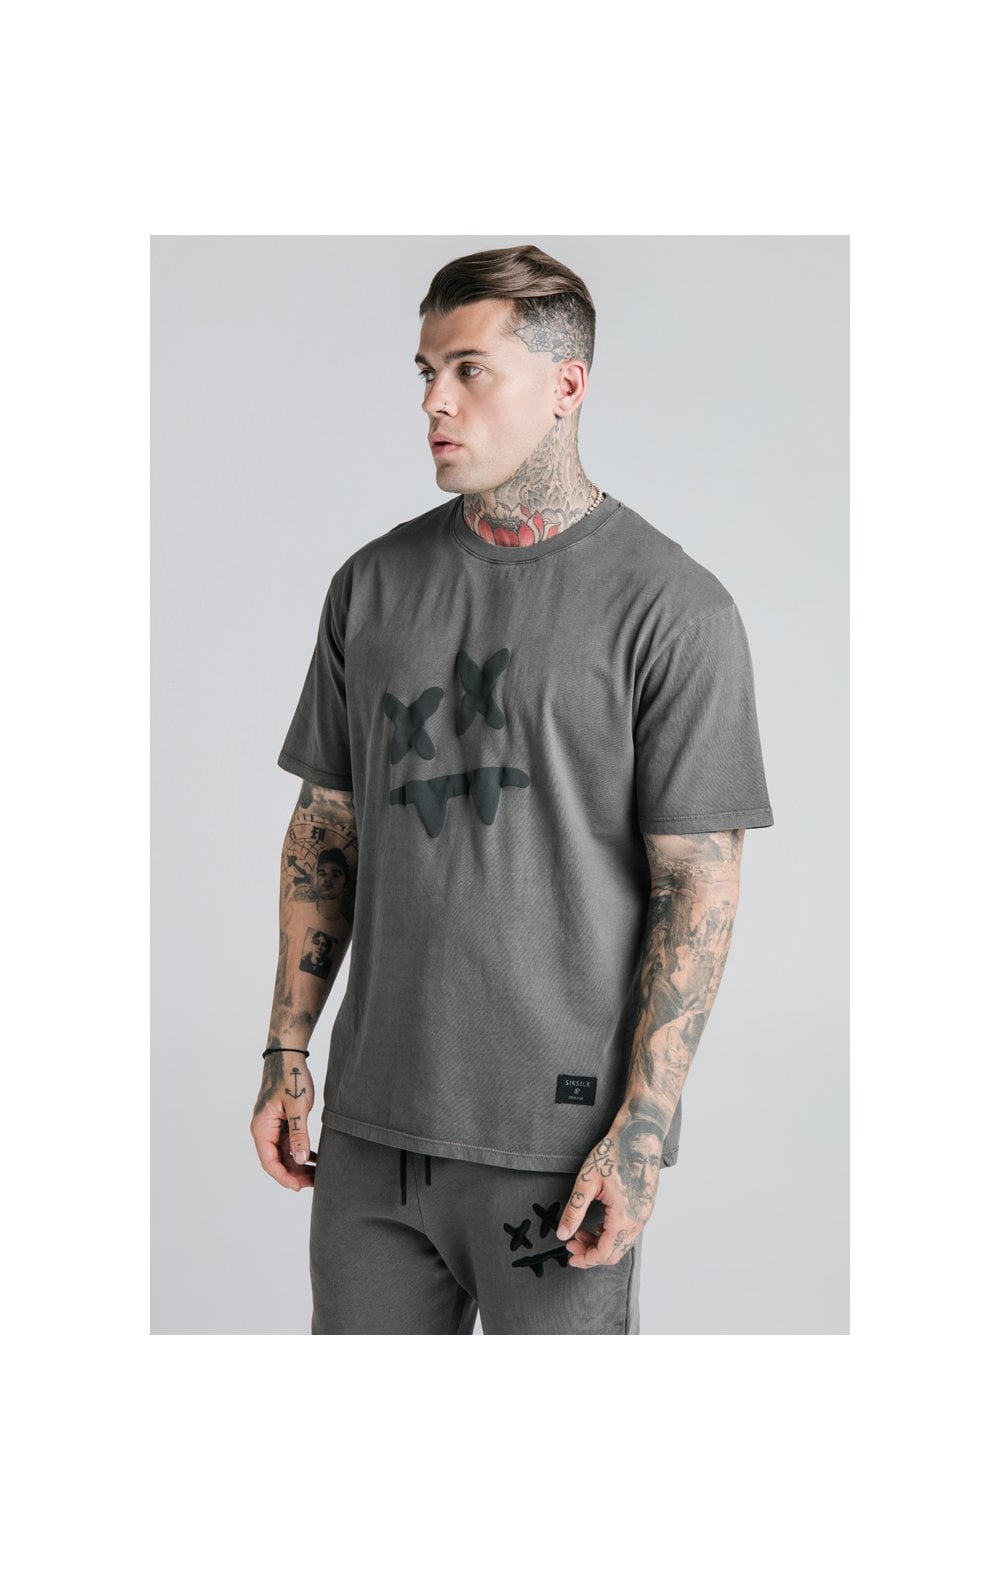 SikSilk X Steve Aoki S/S Oversize Essential Tee – Washed Grey (1)